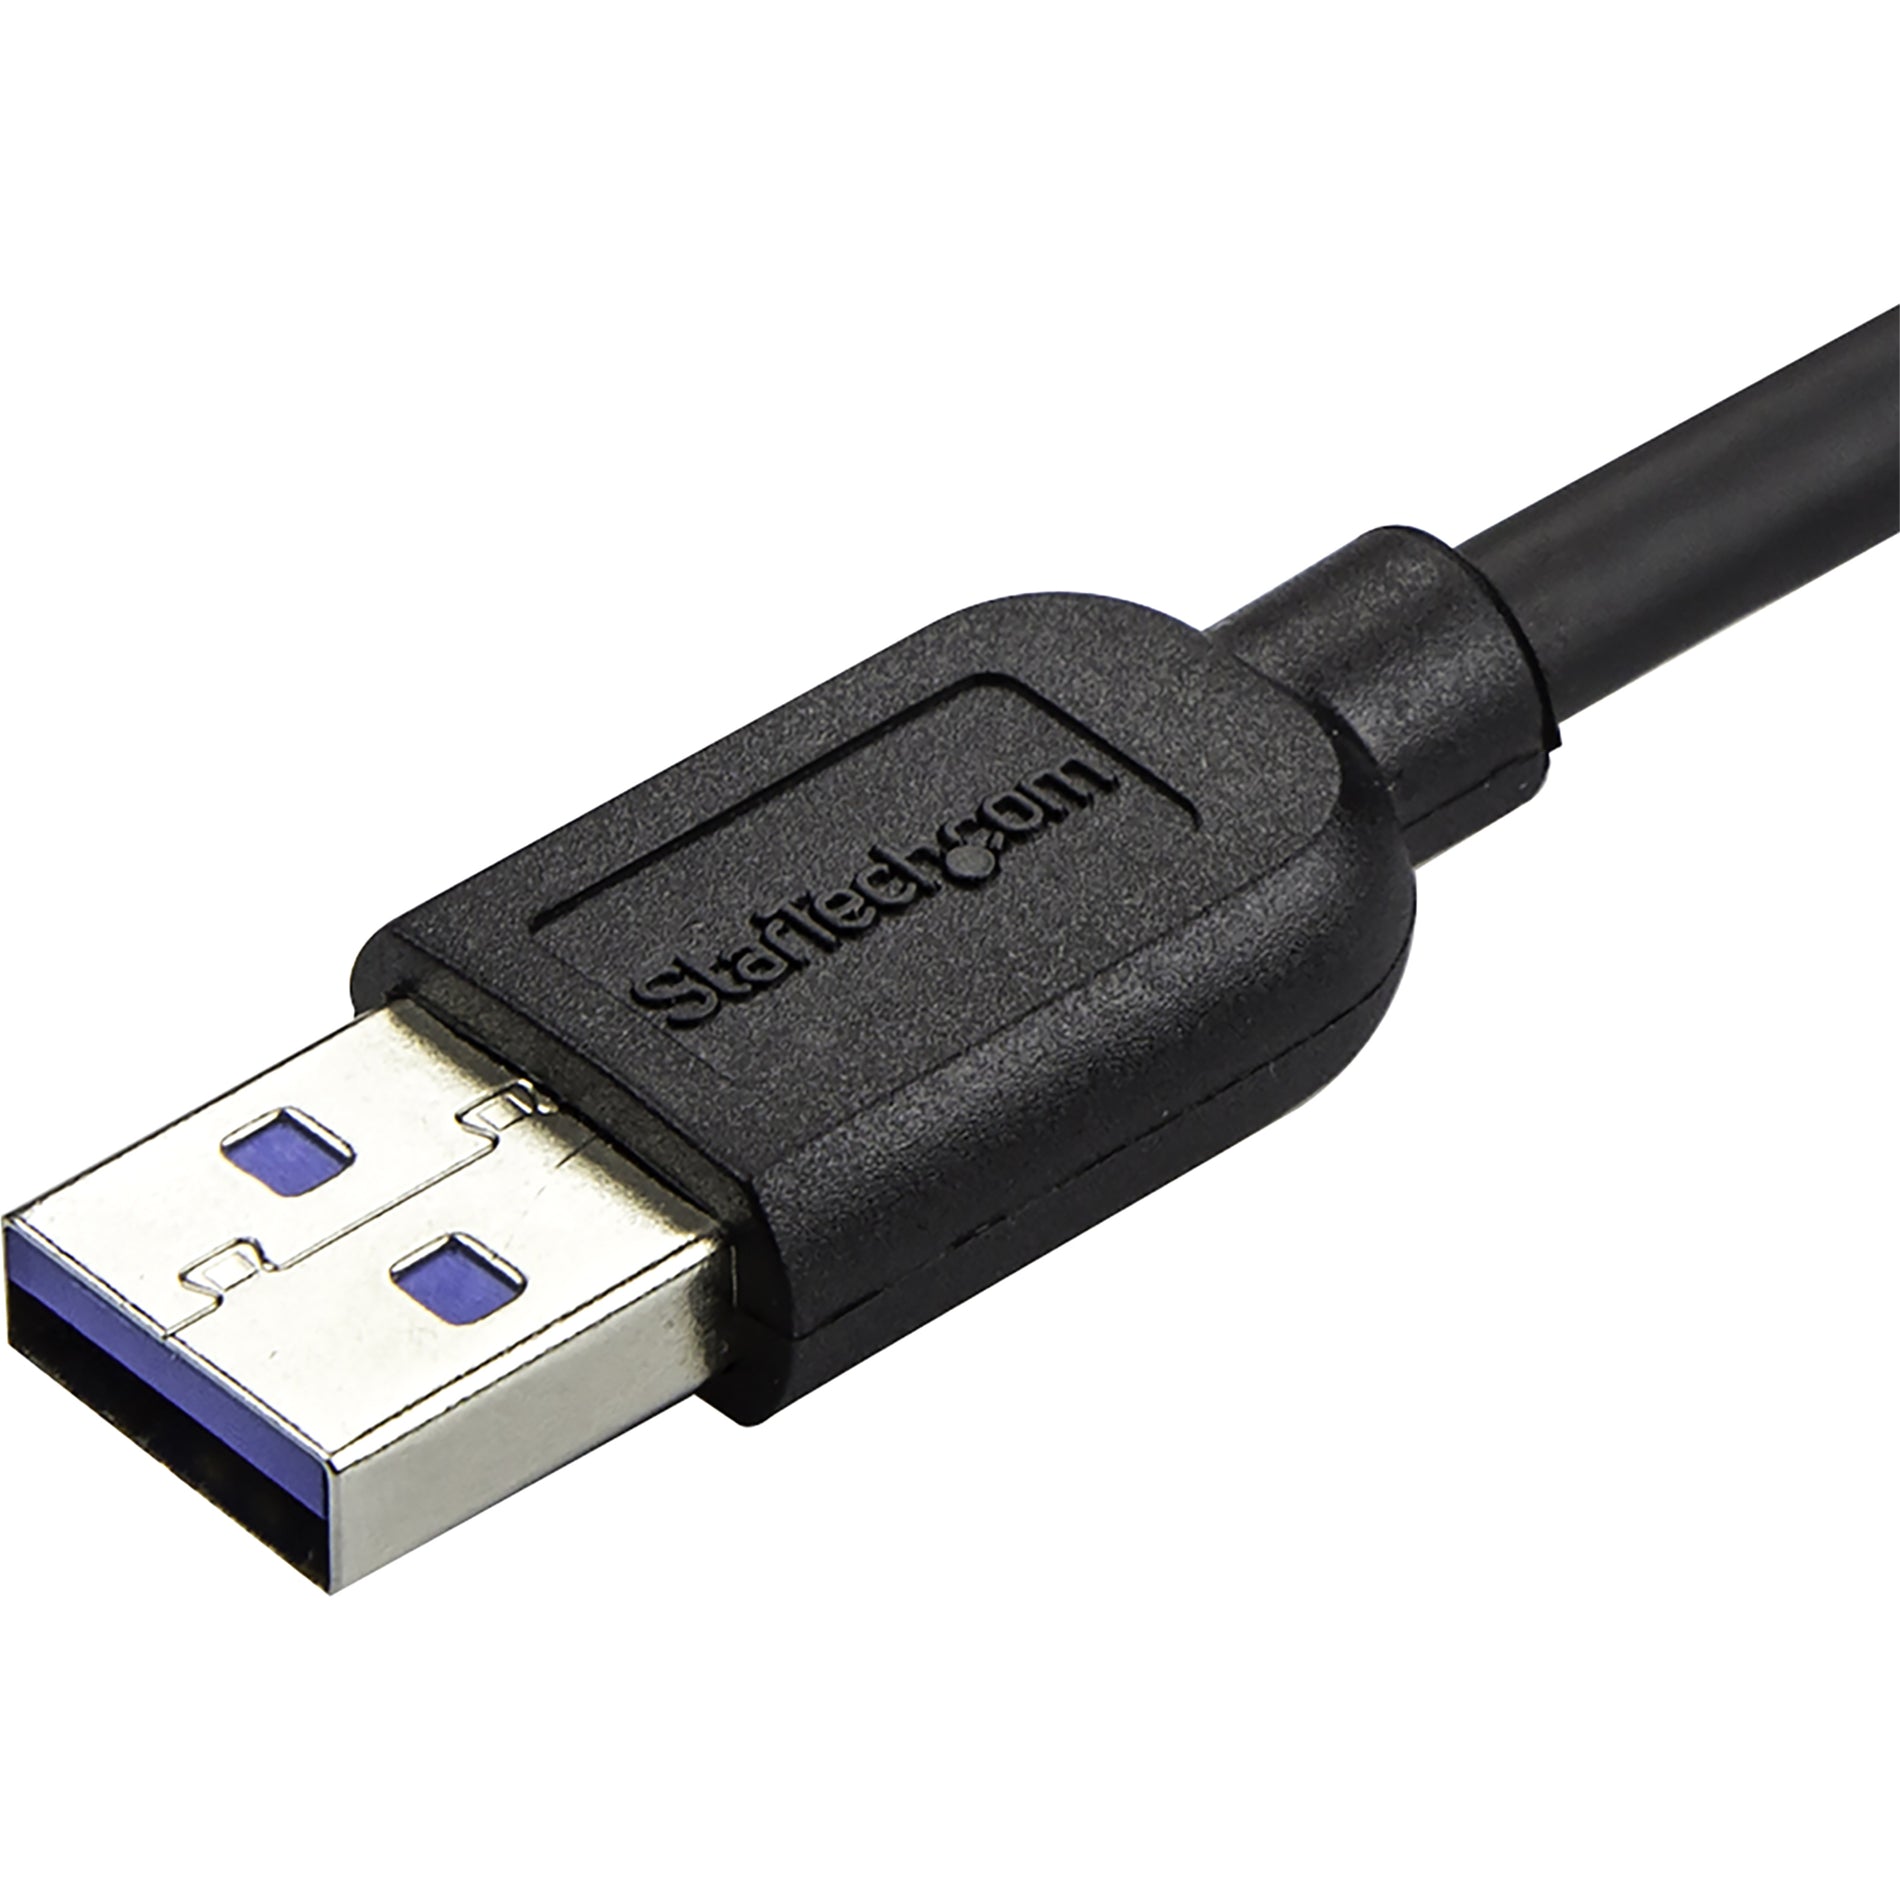 StarTech.com USB3AU1MRS Slim Micro USB 3.0 Cable - Right-angle Micro-USB - 1m, Data Transfer Cable for Tablet, Hard Drive, Card Reader [Discontinued]